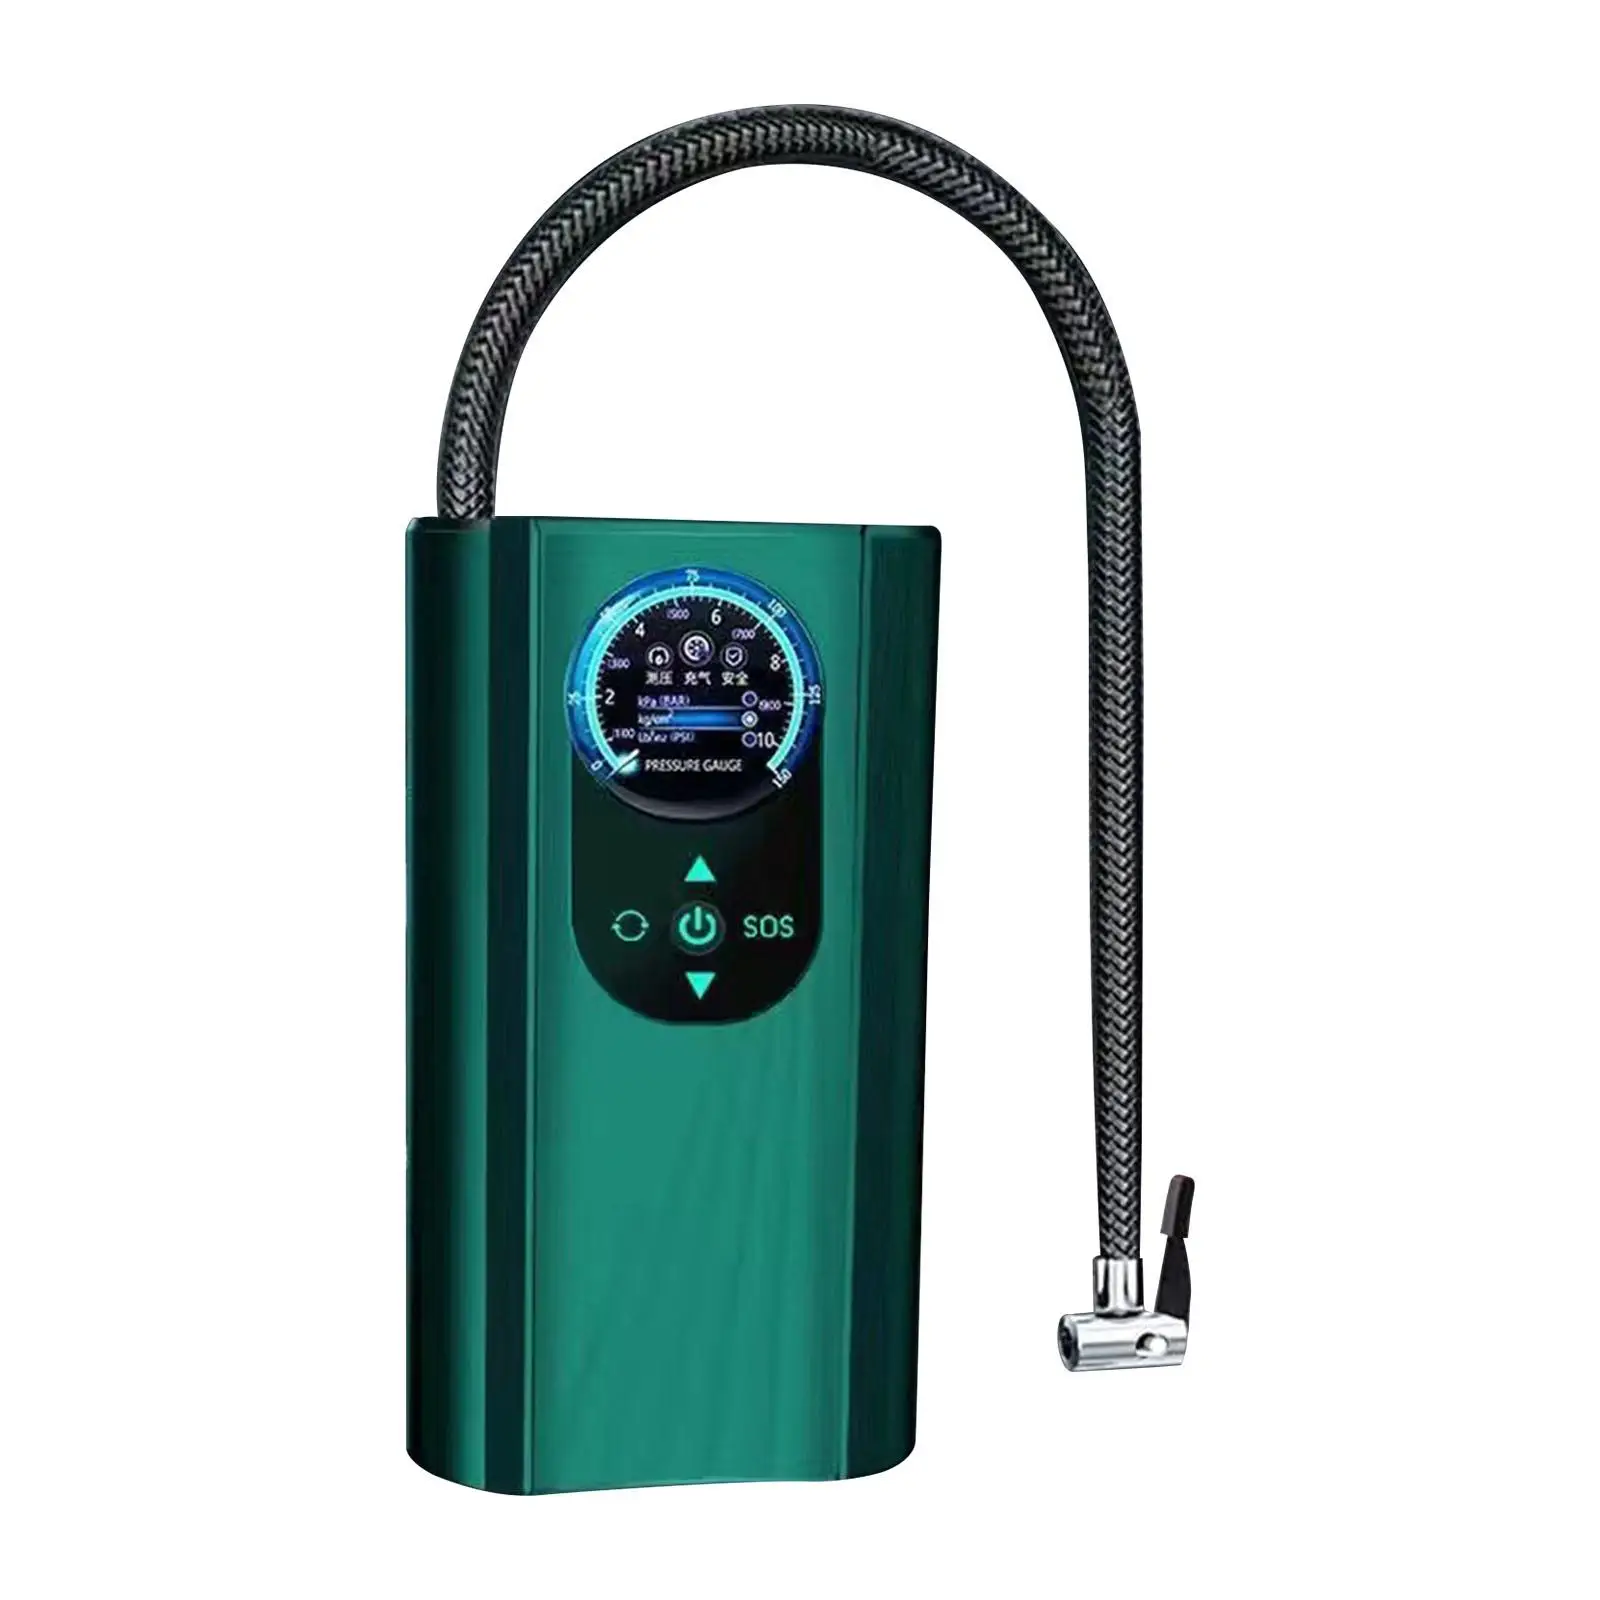 Portable Air Compressor Fast Electric Tire Pump for Bicycle Motorcycle